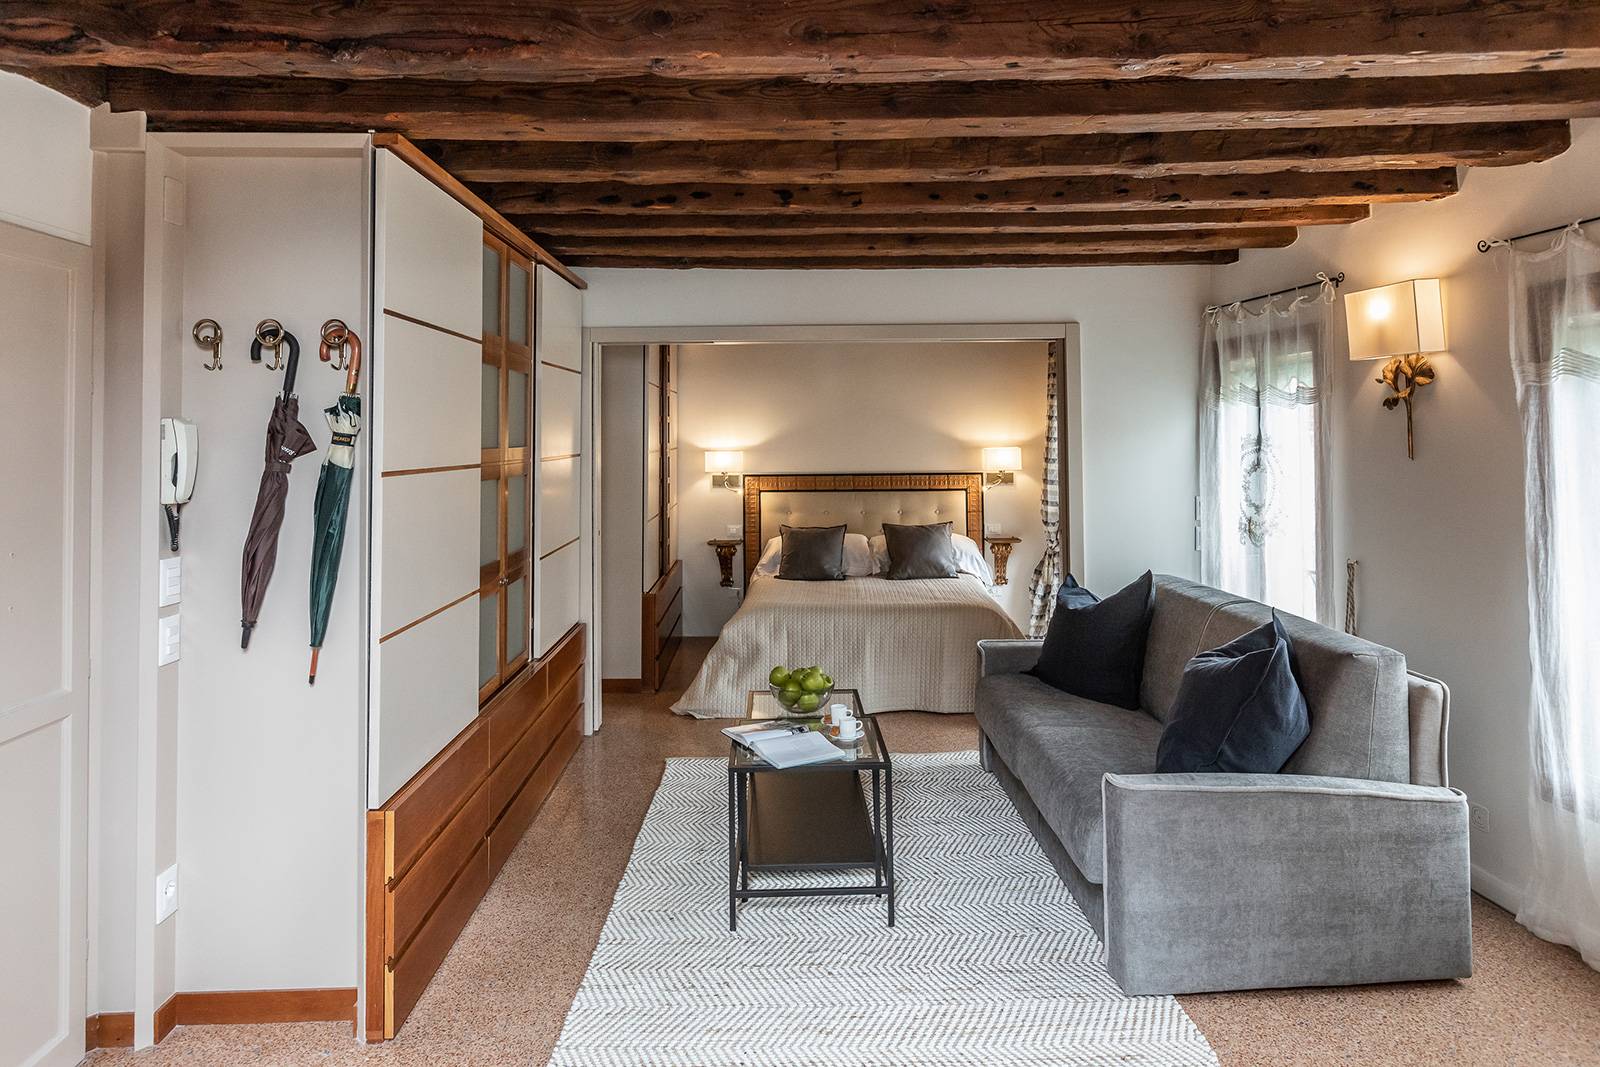 the antique wooden beams and the Terrazzo Veneziano flooring are authentic